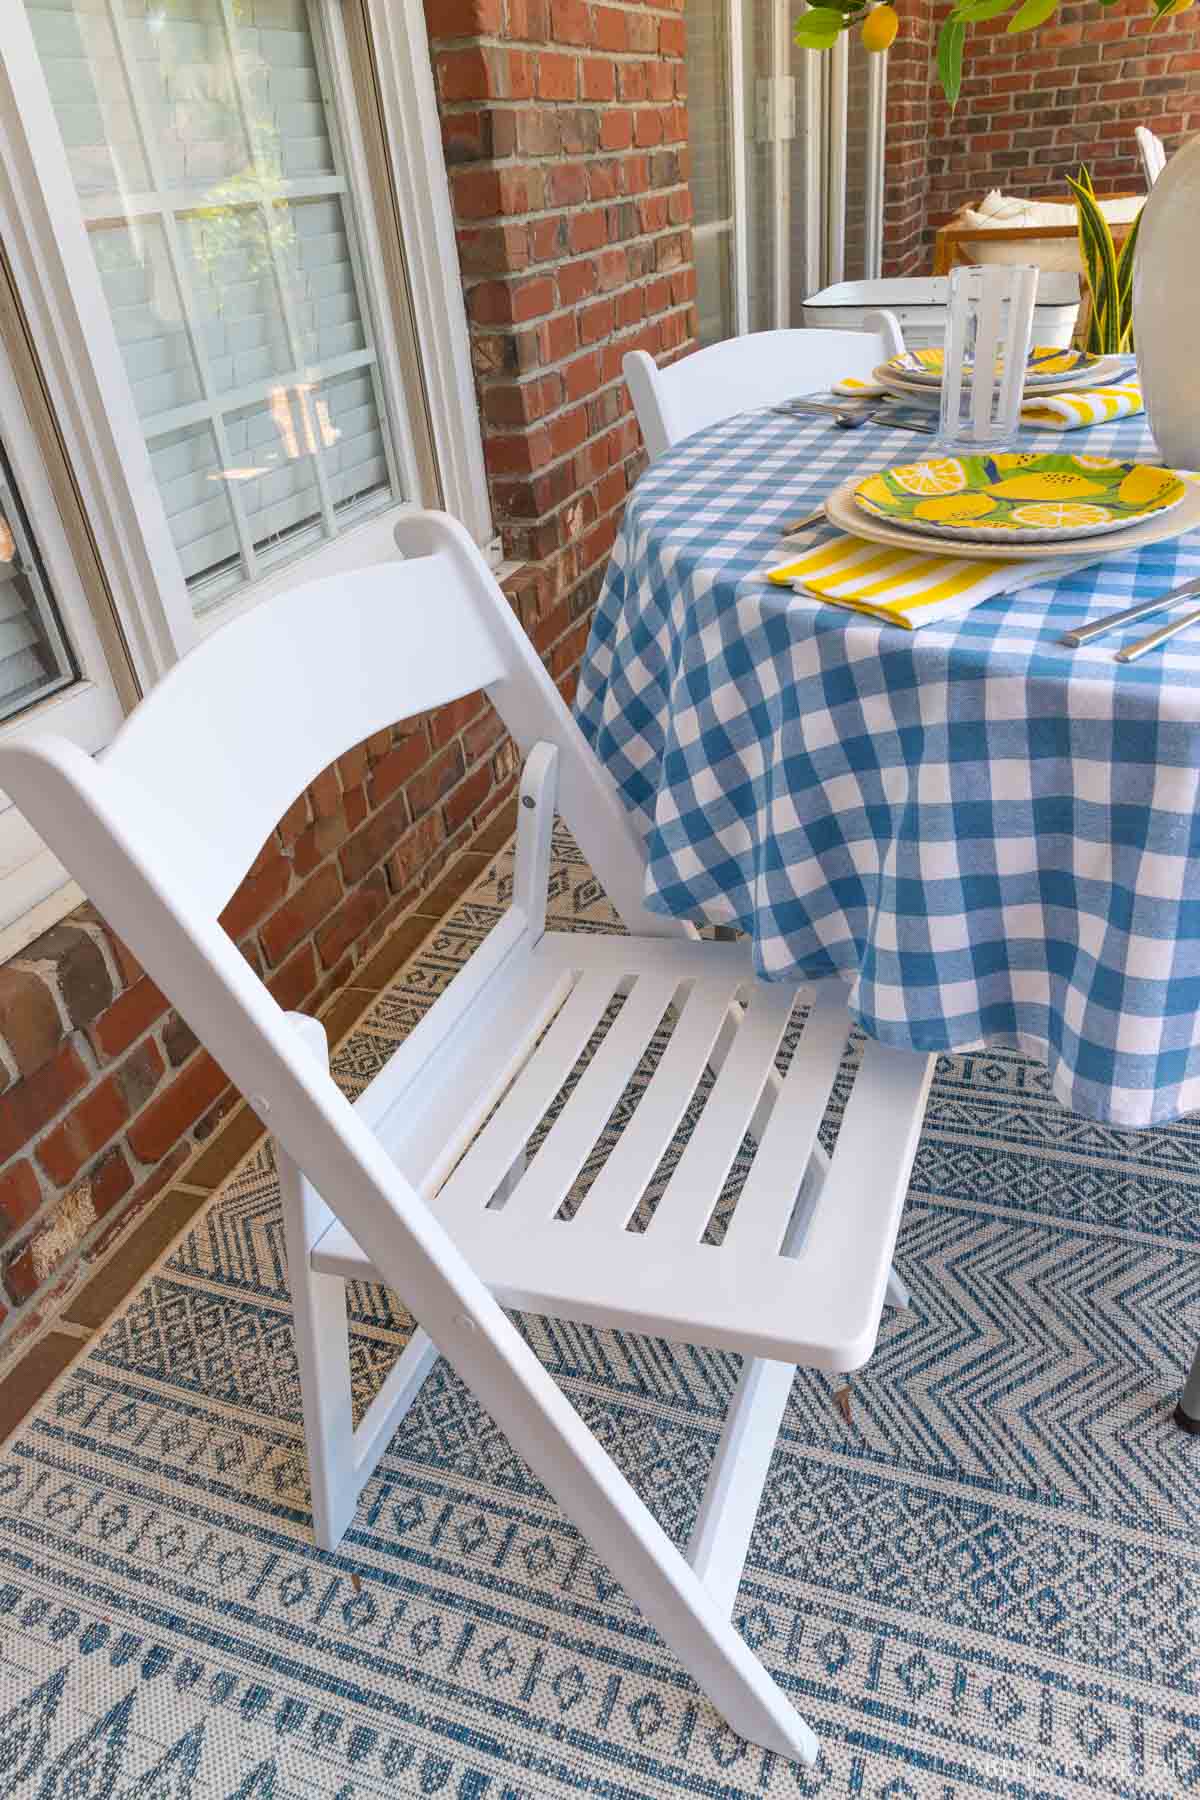 Such stylish outdoor folding chairs! Perfect for extra seating both inside and out!